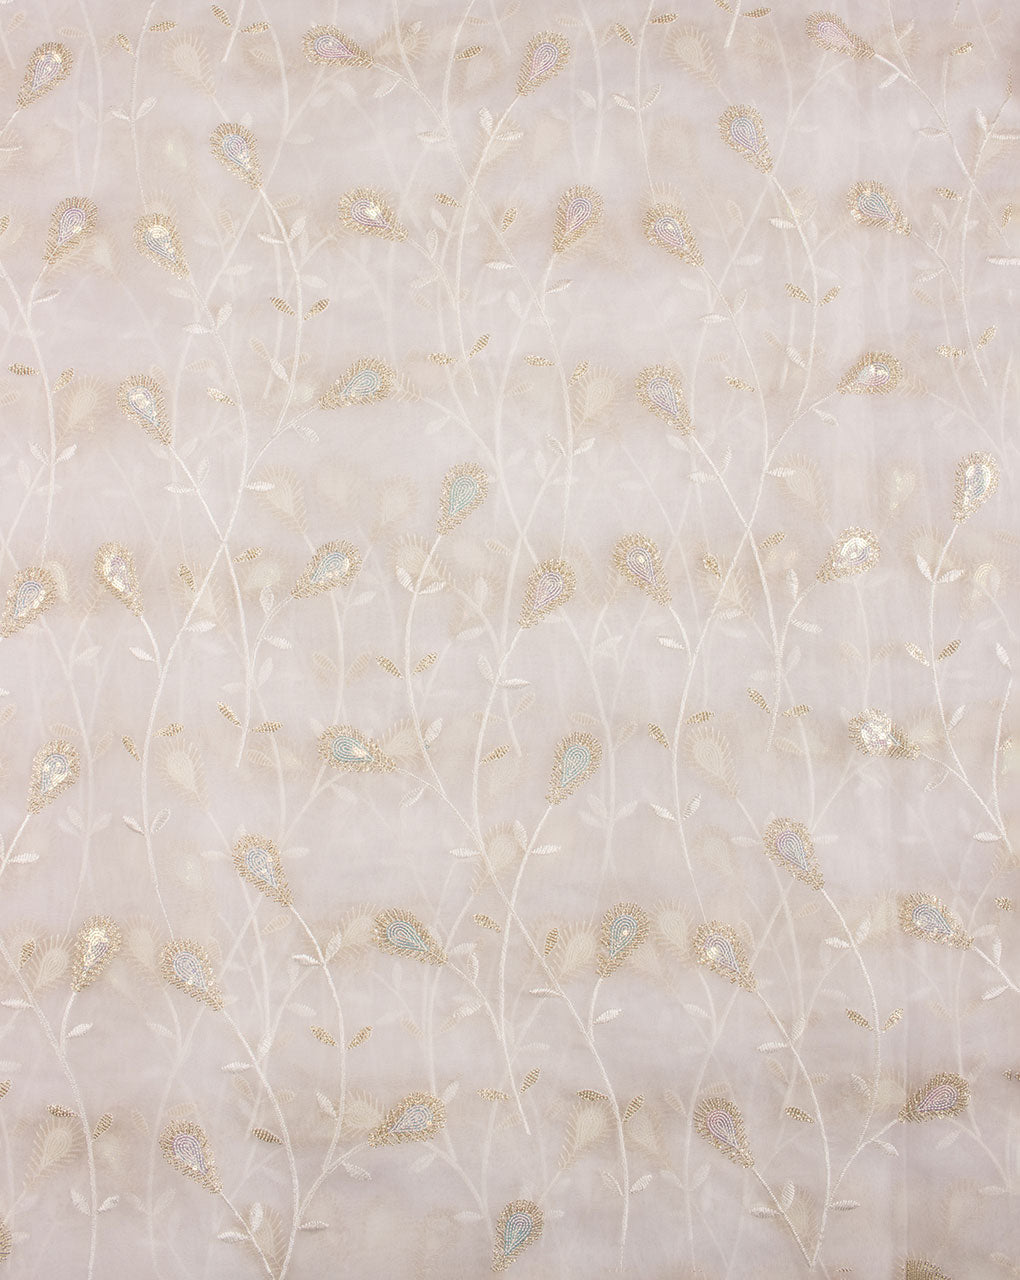 Dyeable Embroidered Sequins Work Organza Fabric - Fabriclore.com